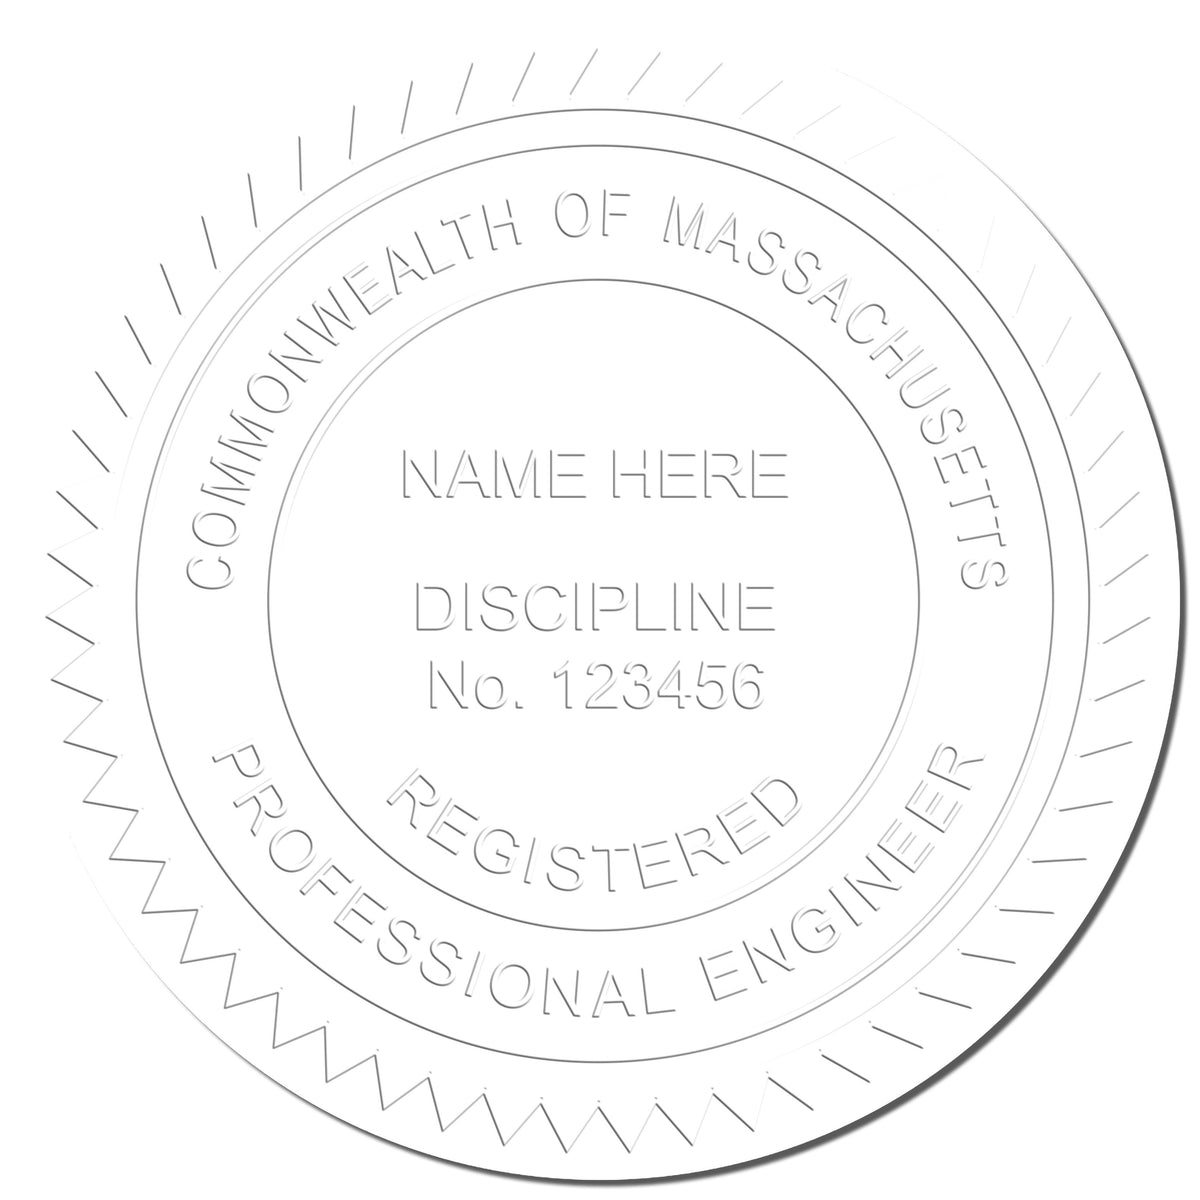 The Long Reach Massachusetts PE Seal stamp impression comes to life with a crisp, detailed photo on paper - showcasing true professional quality.